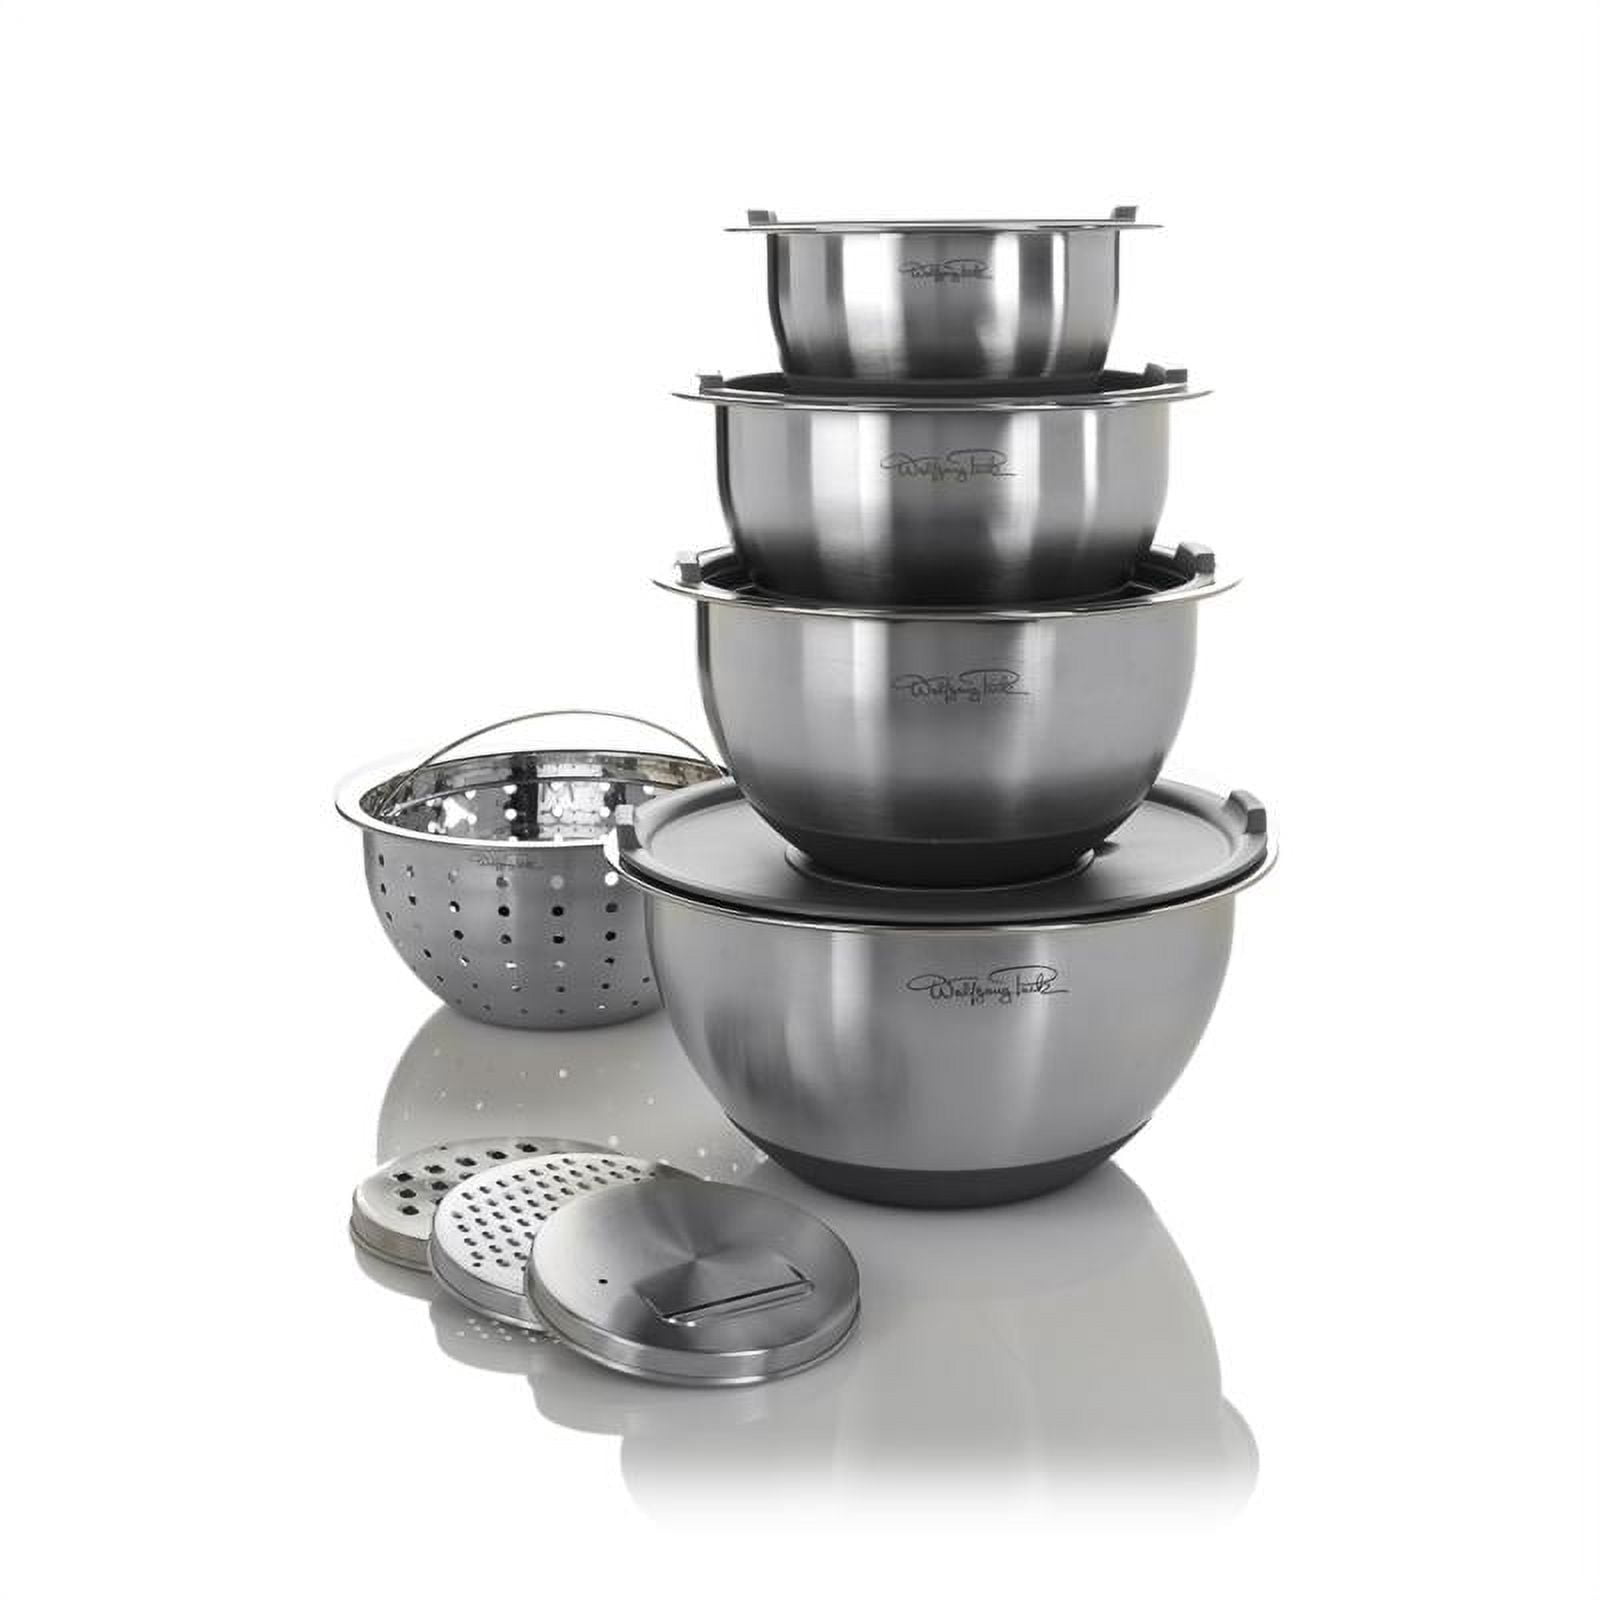 Wolfgang Puck 12-Piece Stainless Steel Mixing Bowls – Wolfgang Puck Home